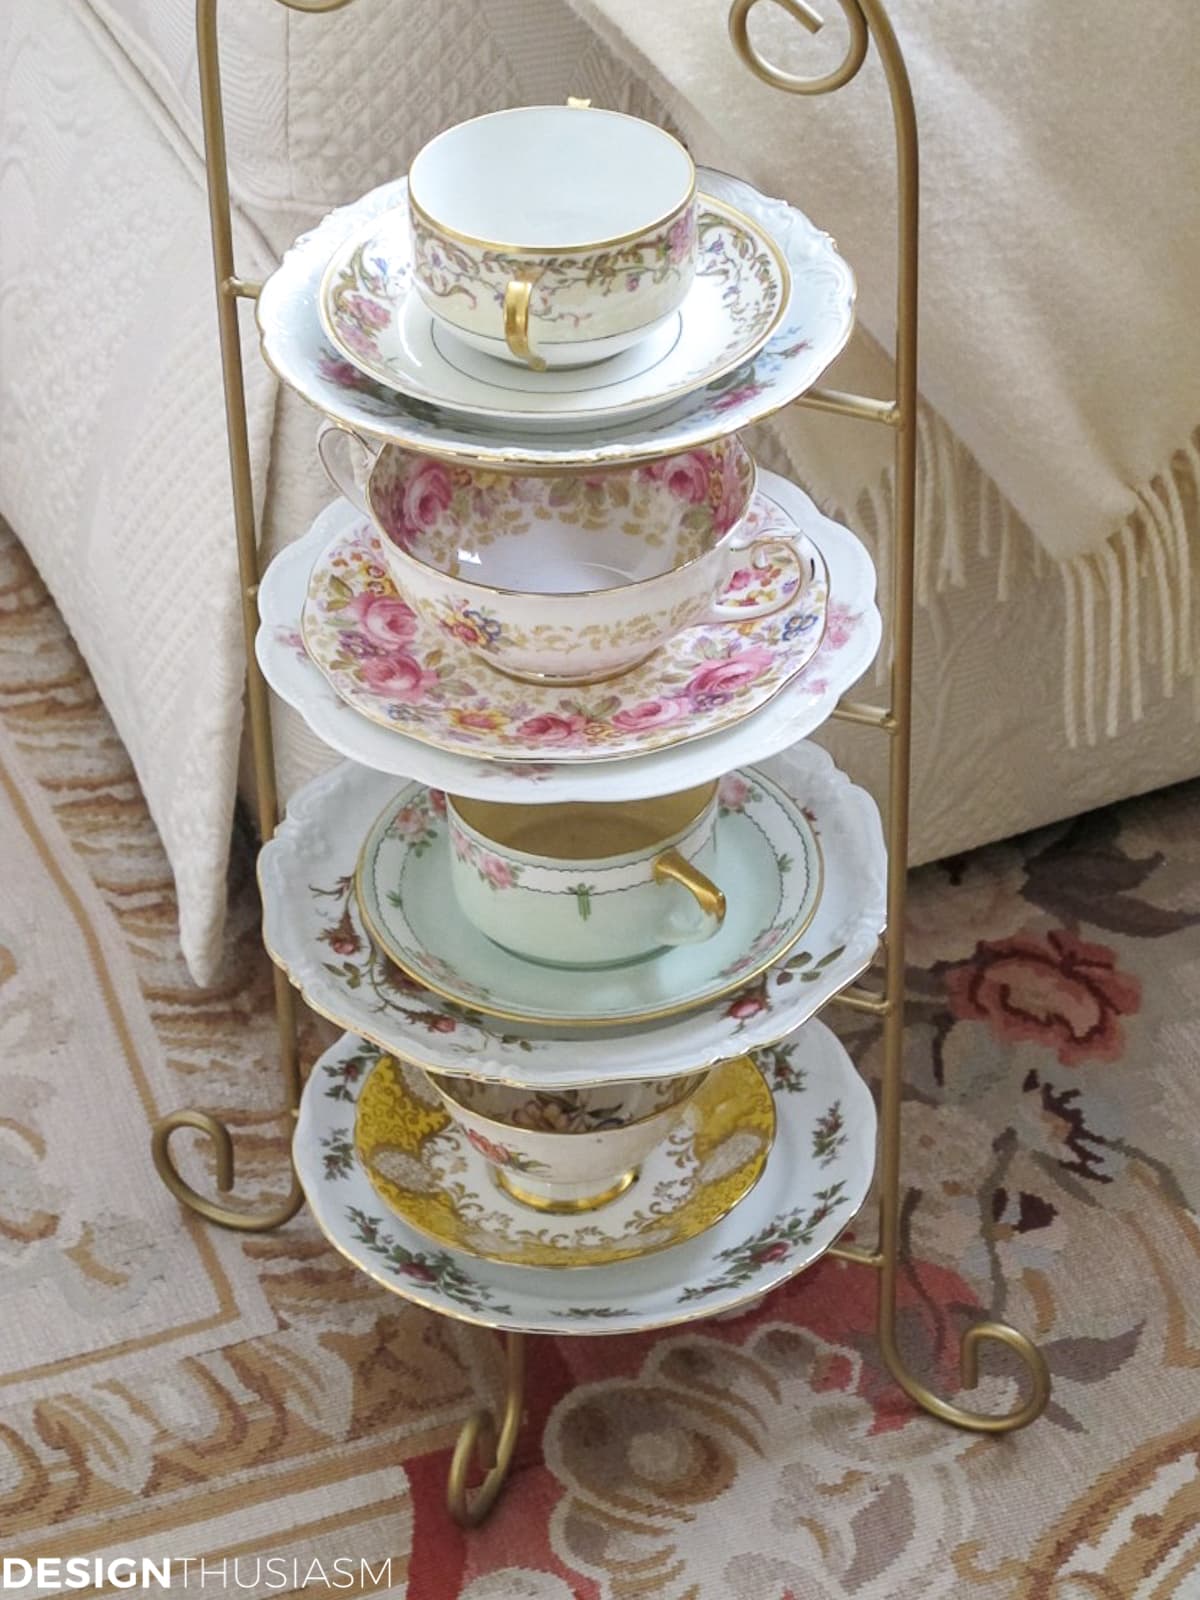 vintage tea cups and plates displayed on a wire shelf